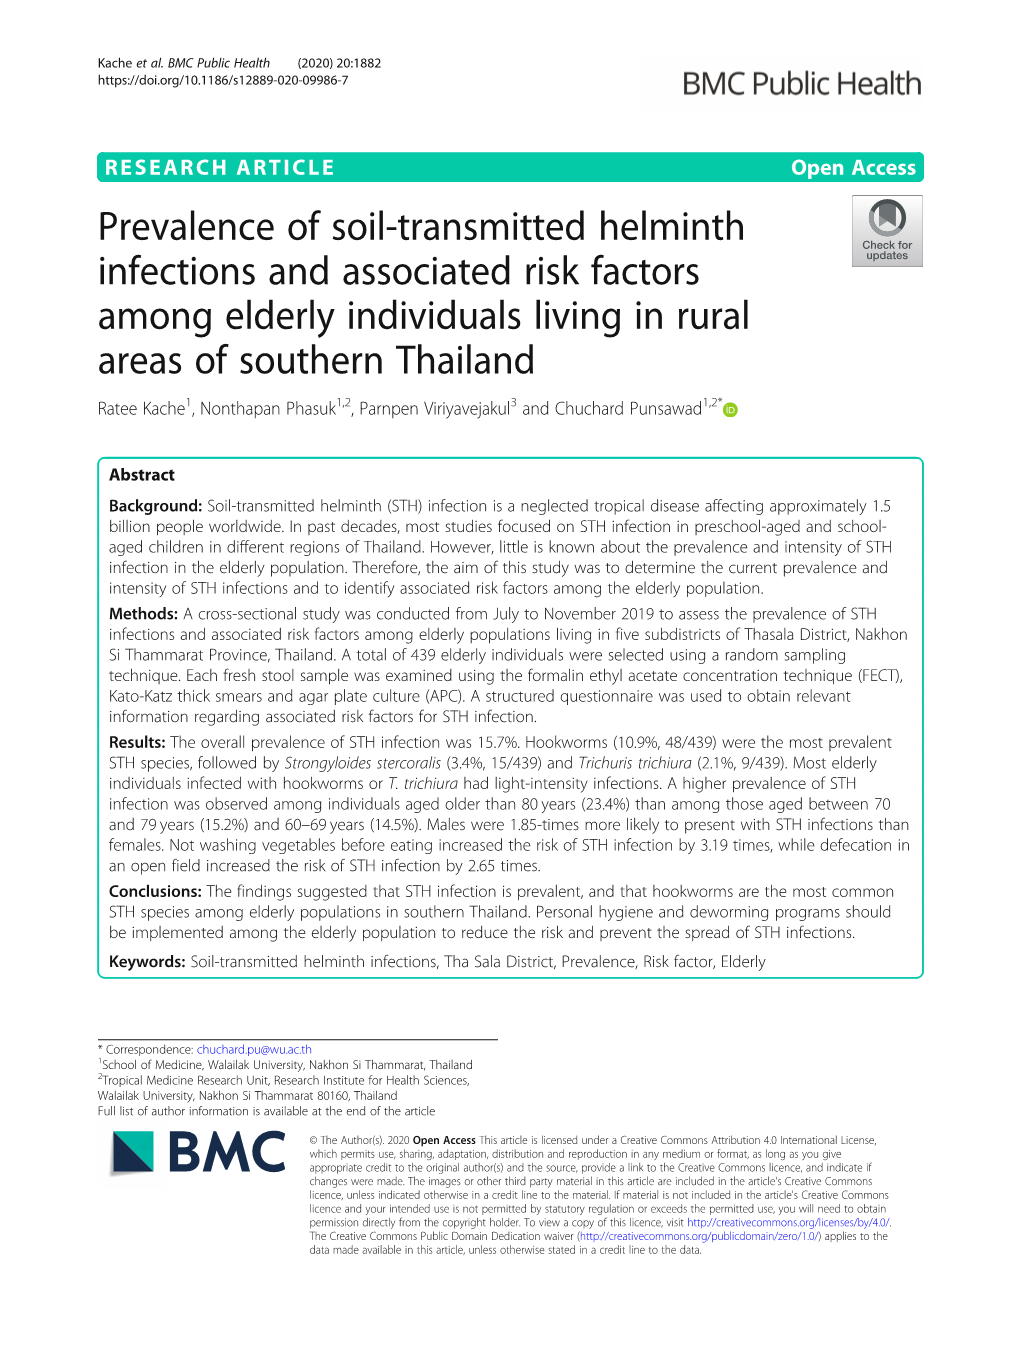 Prevalence of Soil-Transmitted Helminth Infections and Associated